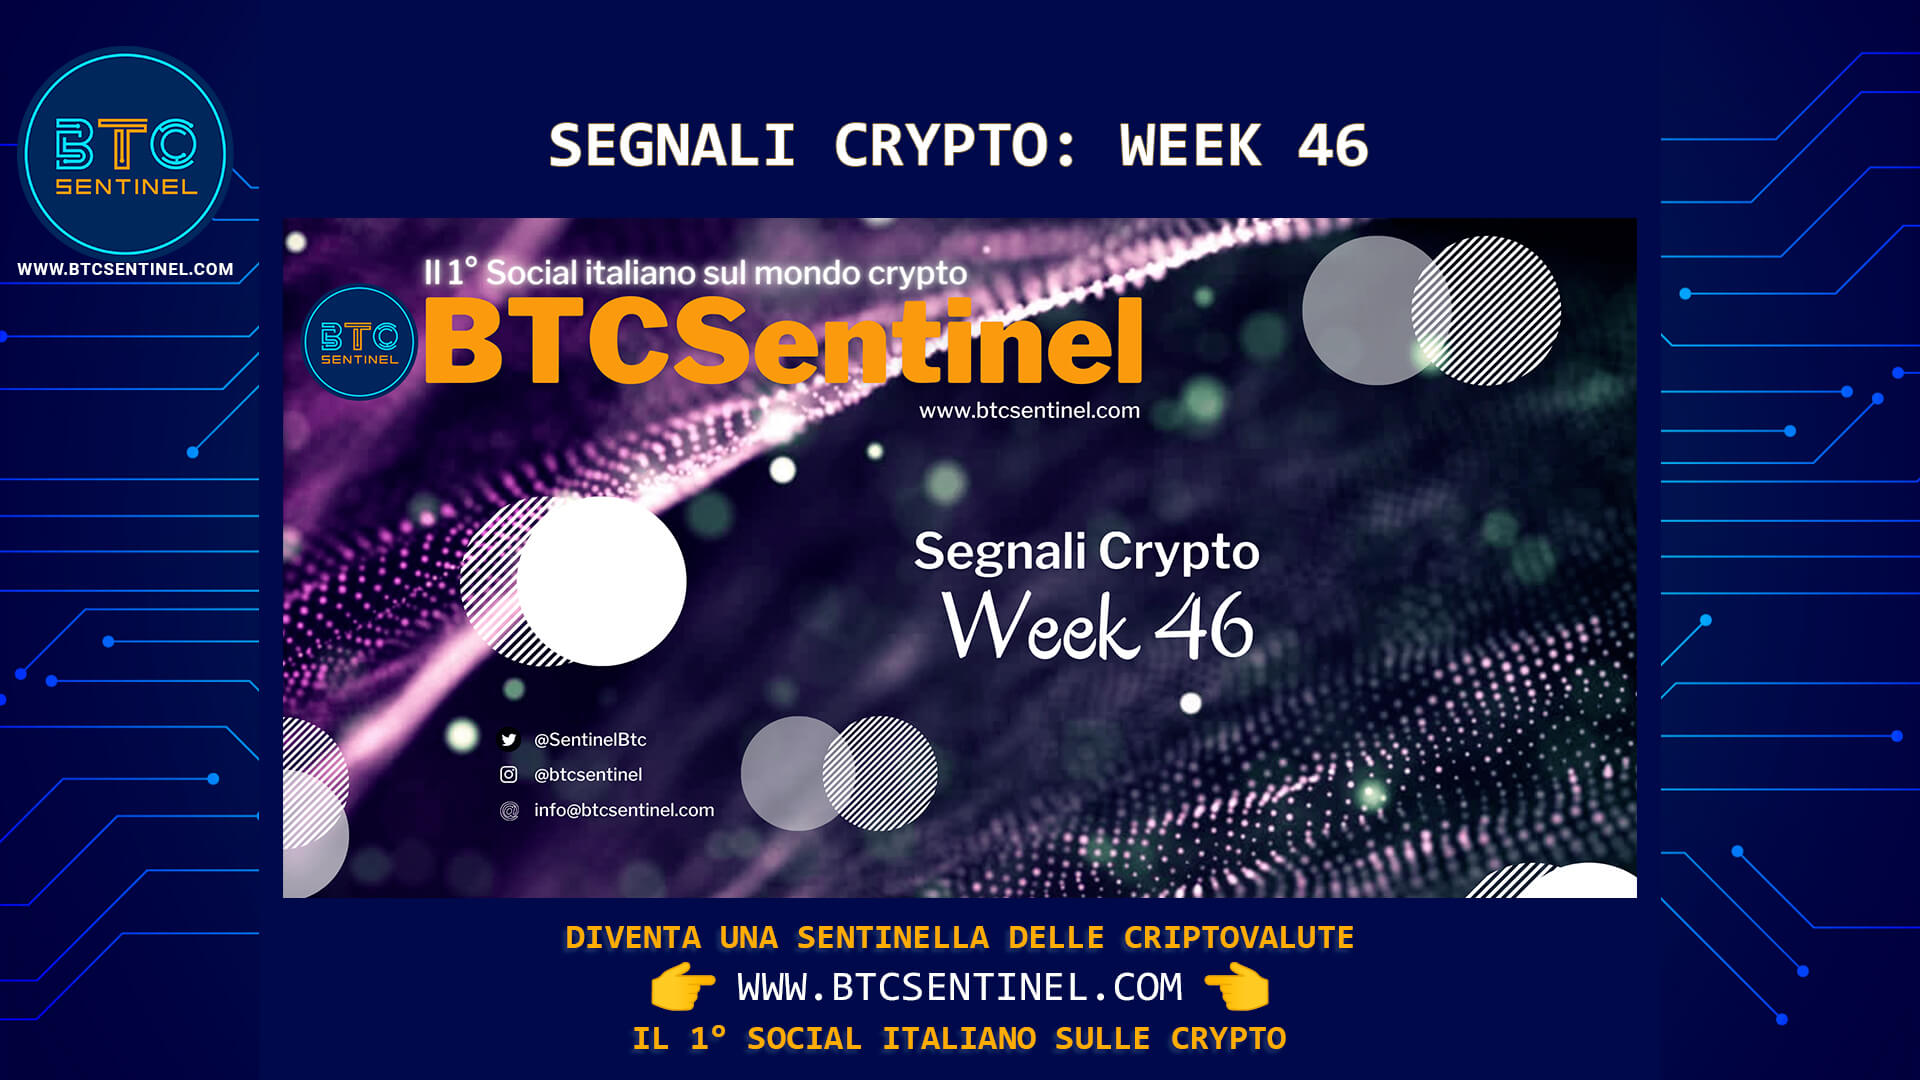 Segnali Crypto Week 46, alle 17.00 sul canale YouTube BTCSentinel